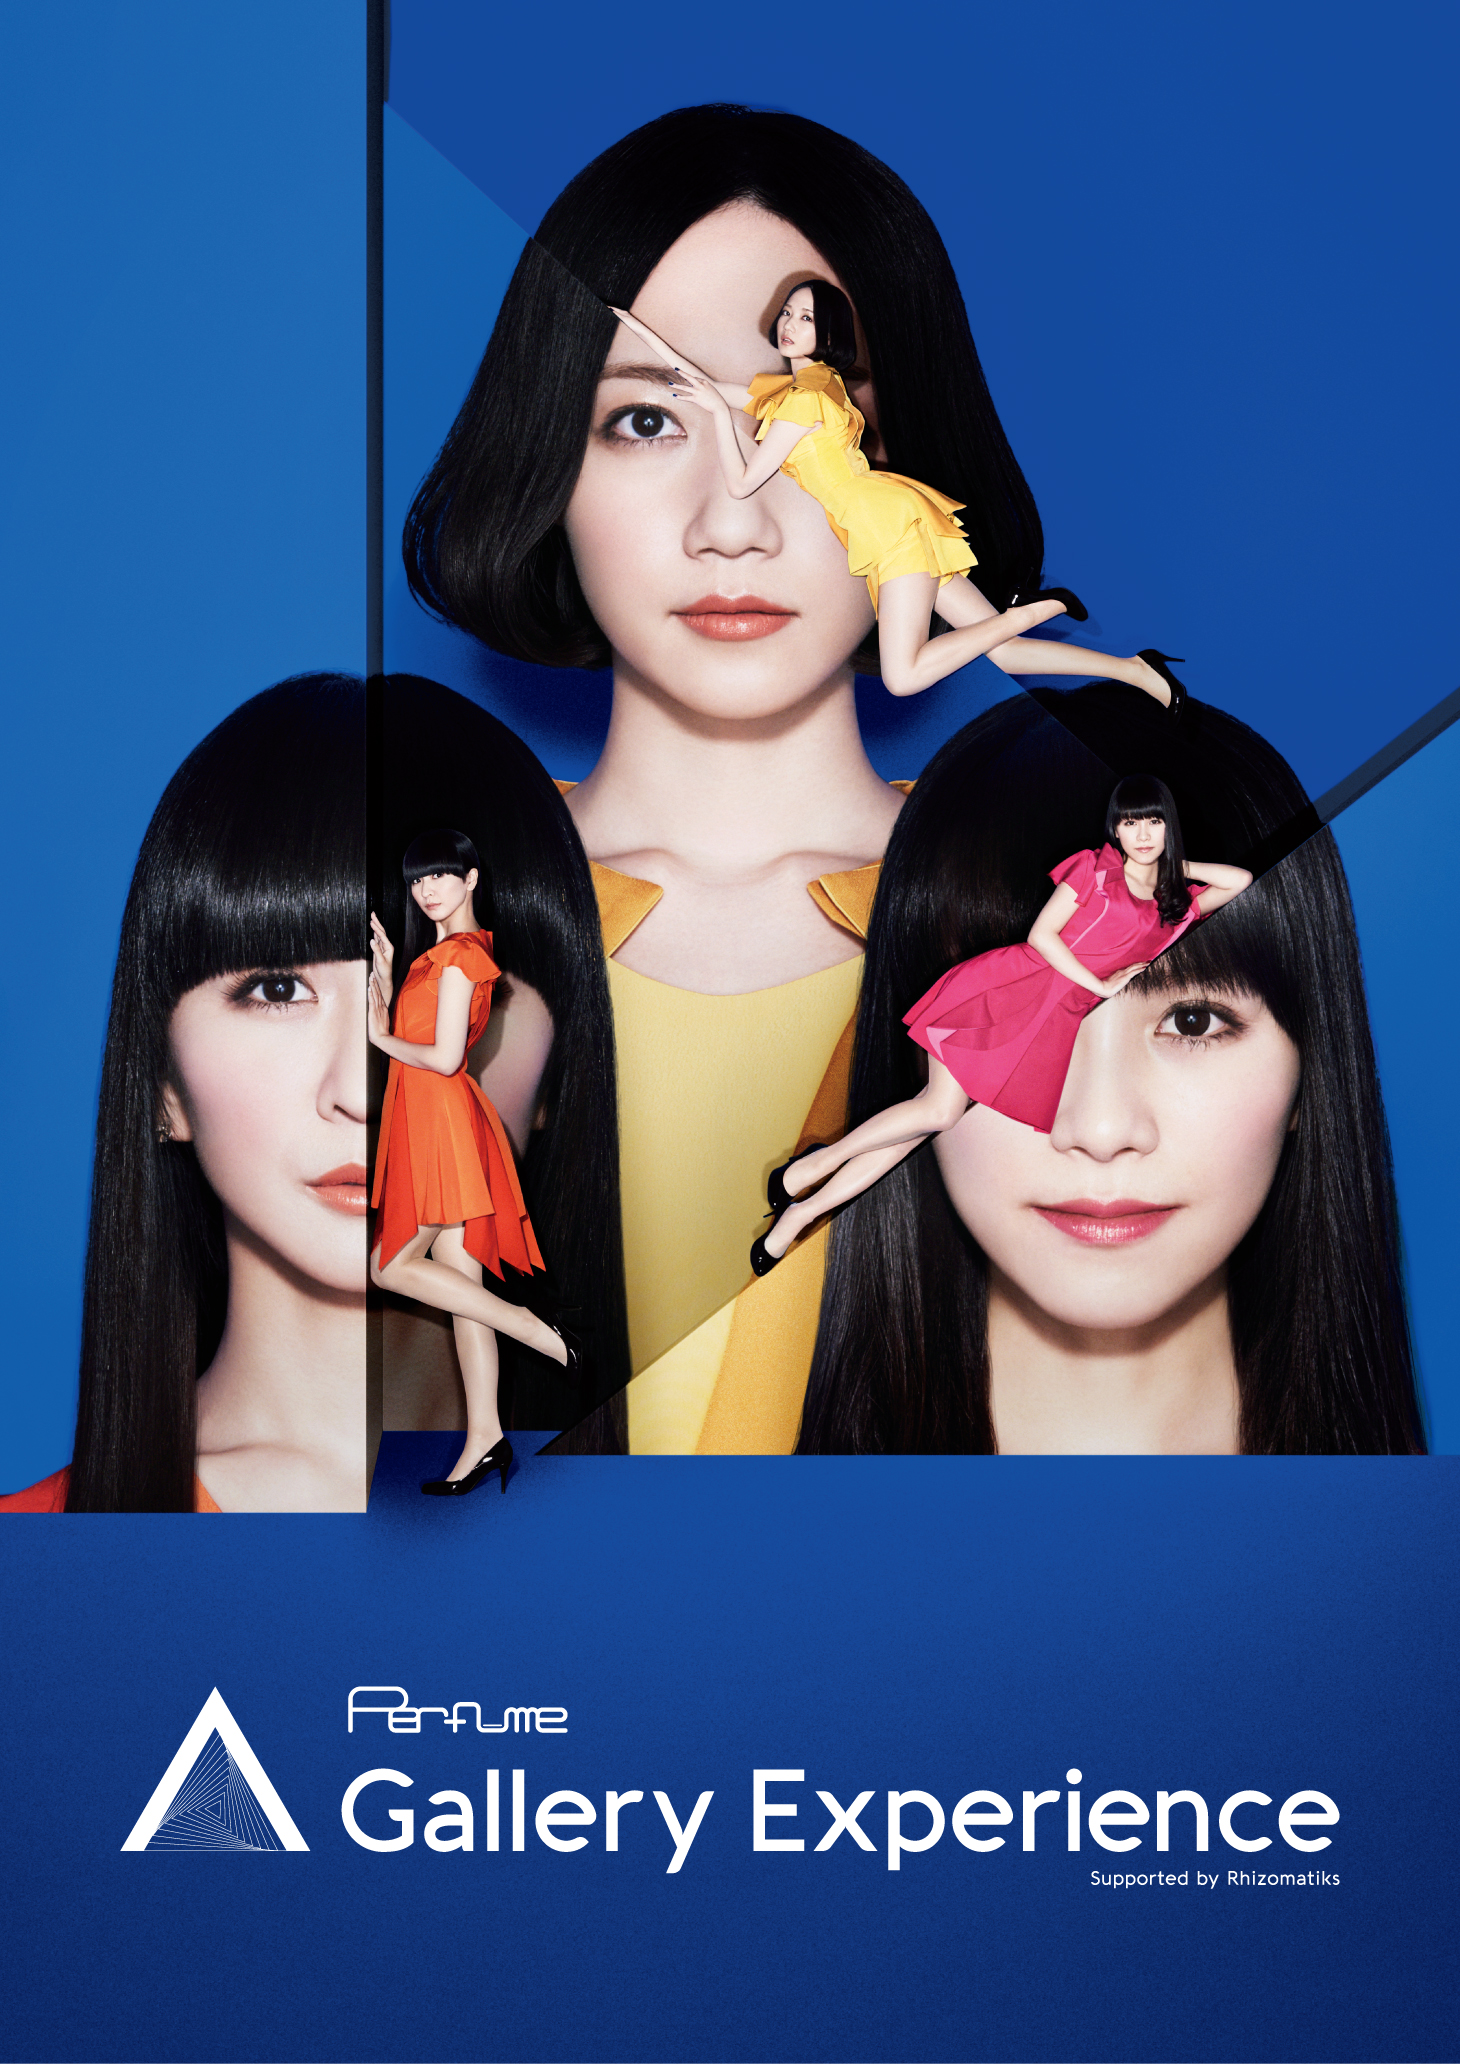 Perfume_Gallery_Experience_poster